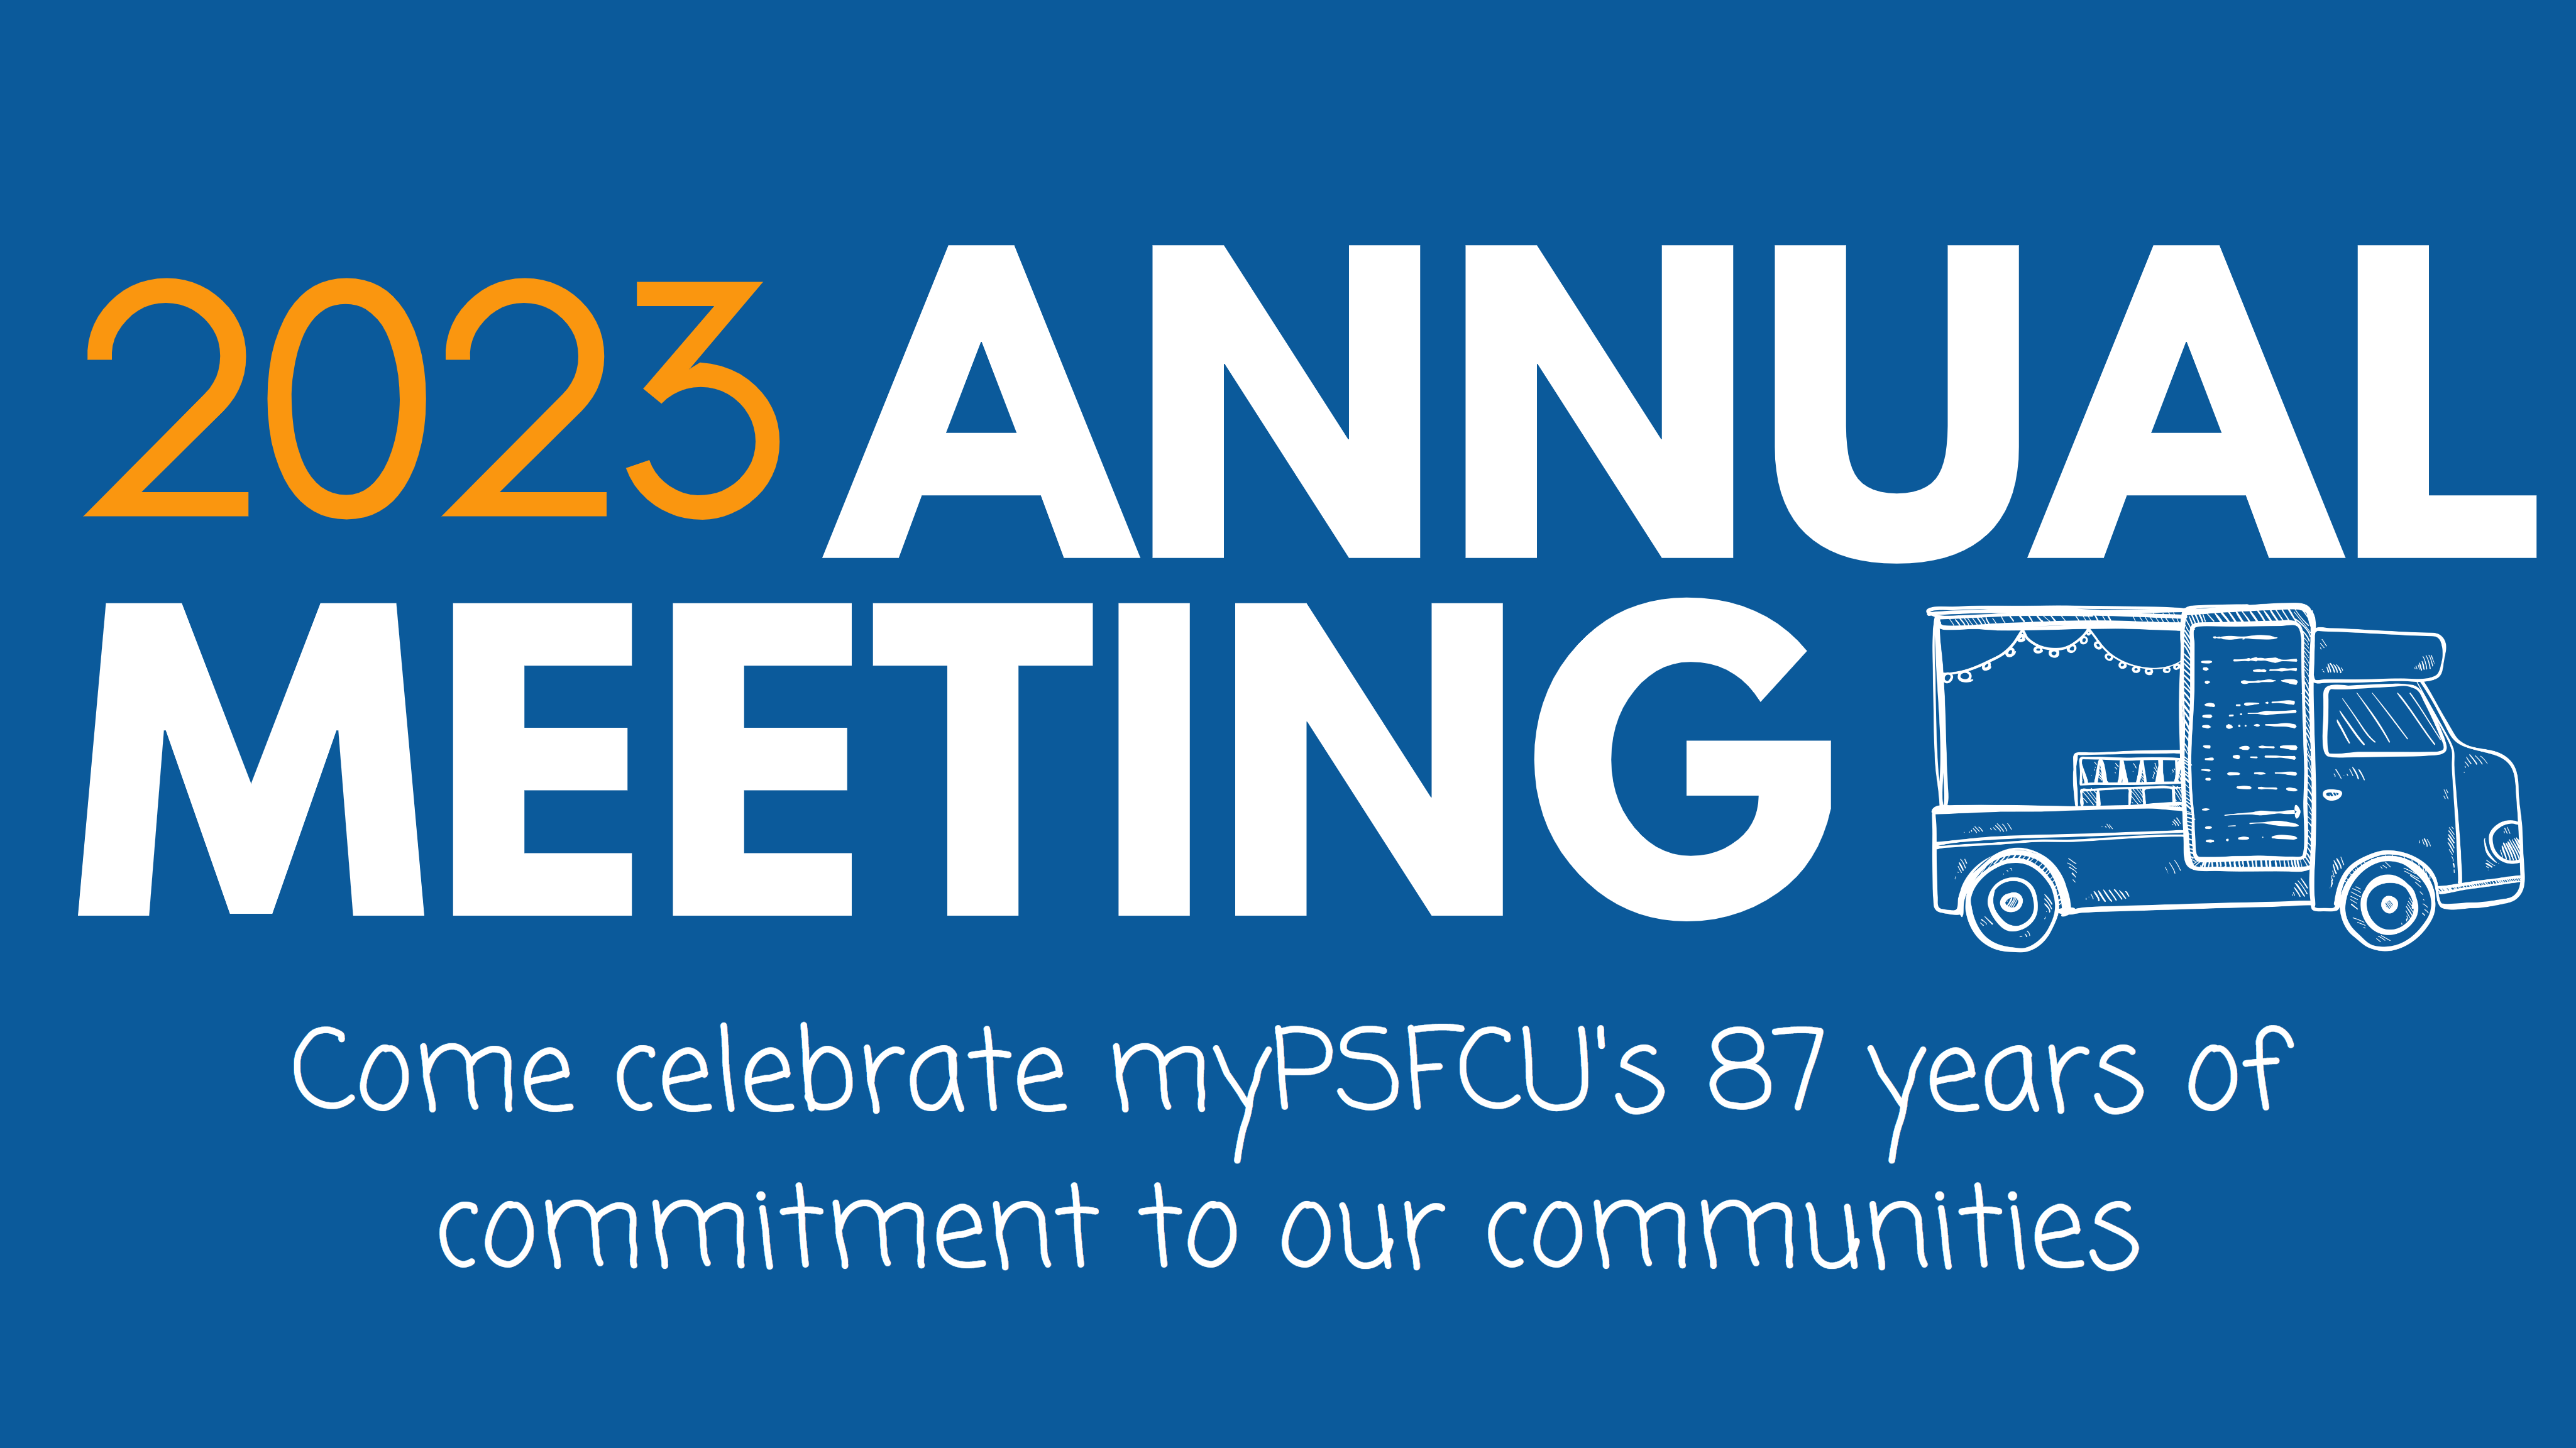 2023 annual meeting - come celebrate myPSFCU's 87 years of commitment to our communities